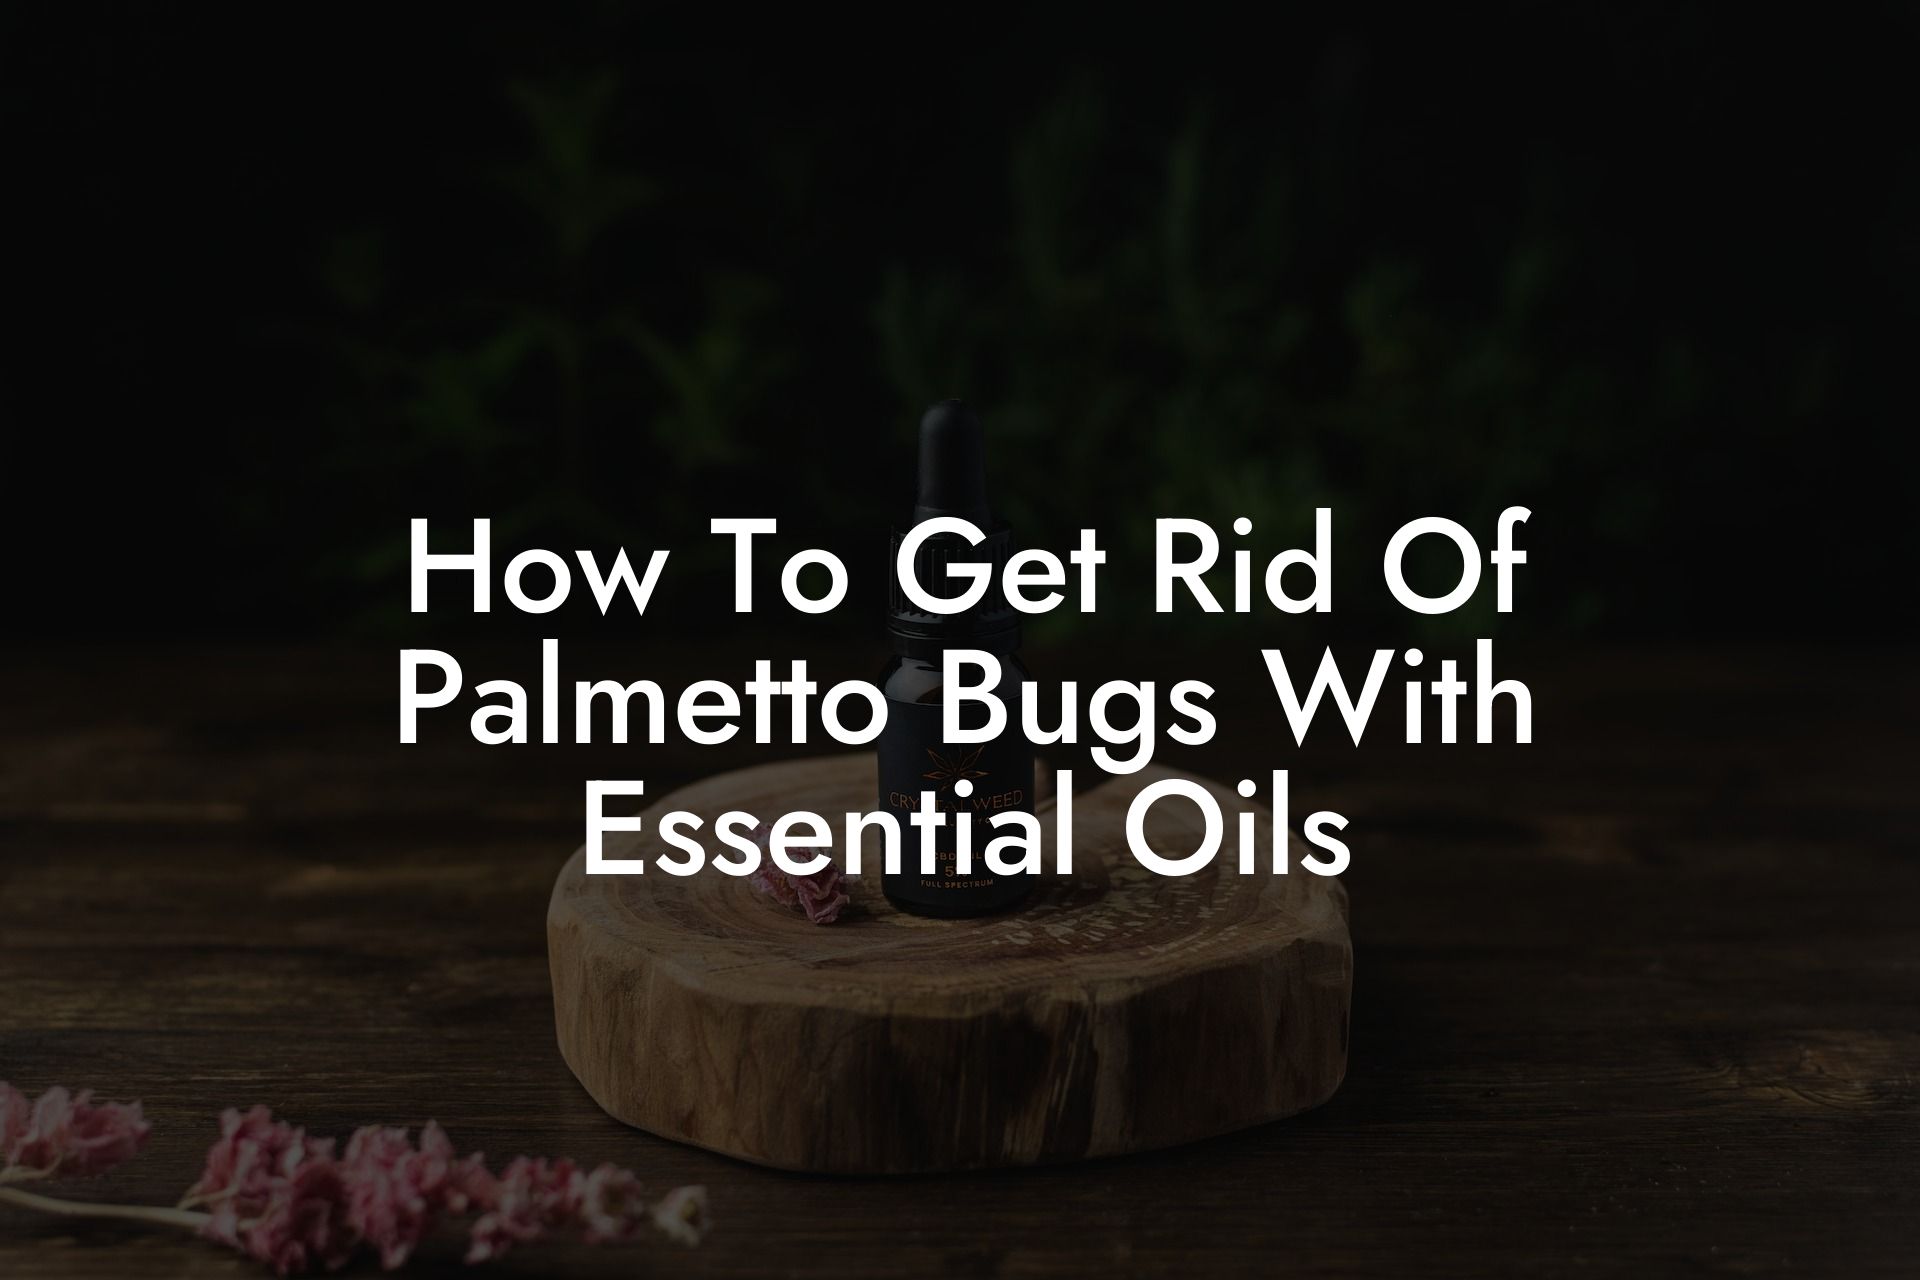 How To Get Rid Of Palmetto Bugs With Essential Oils